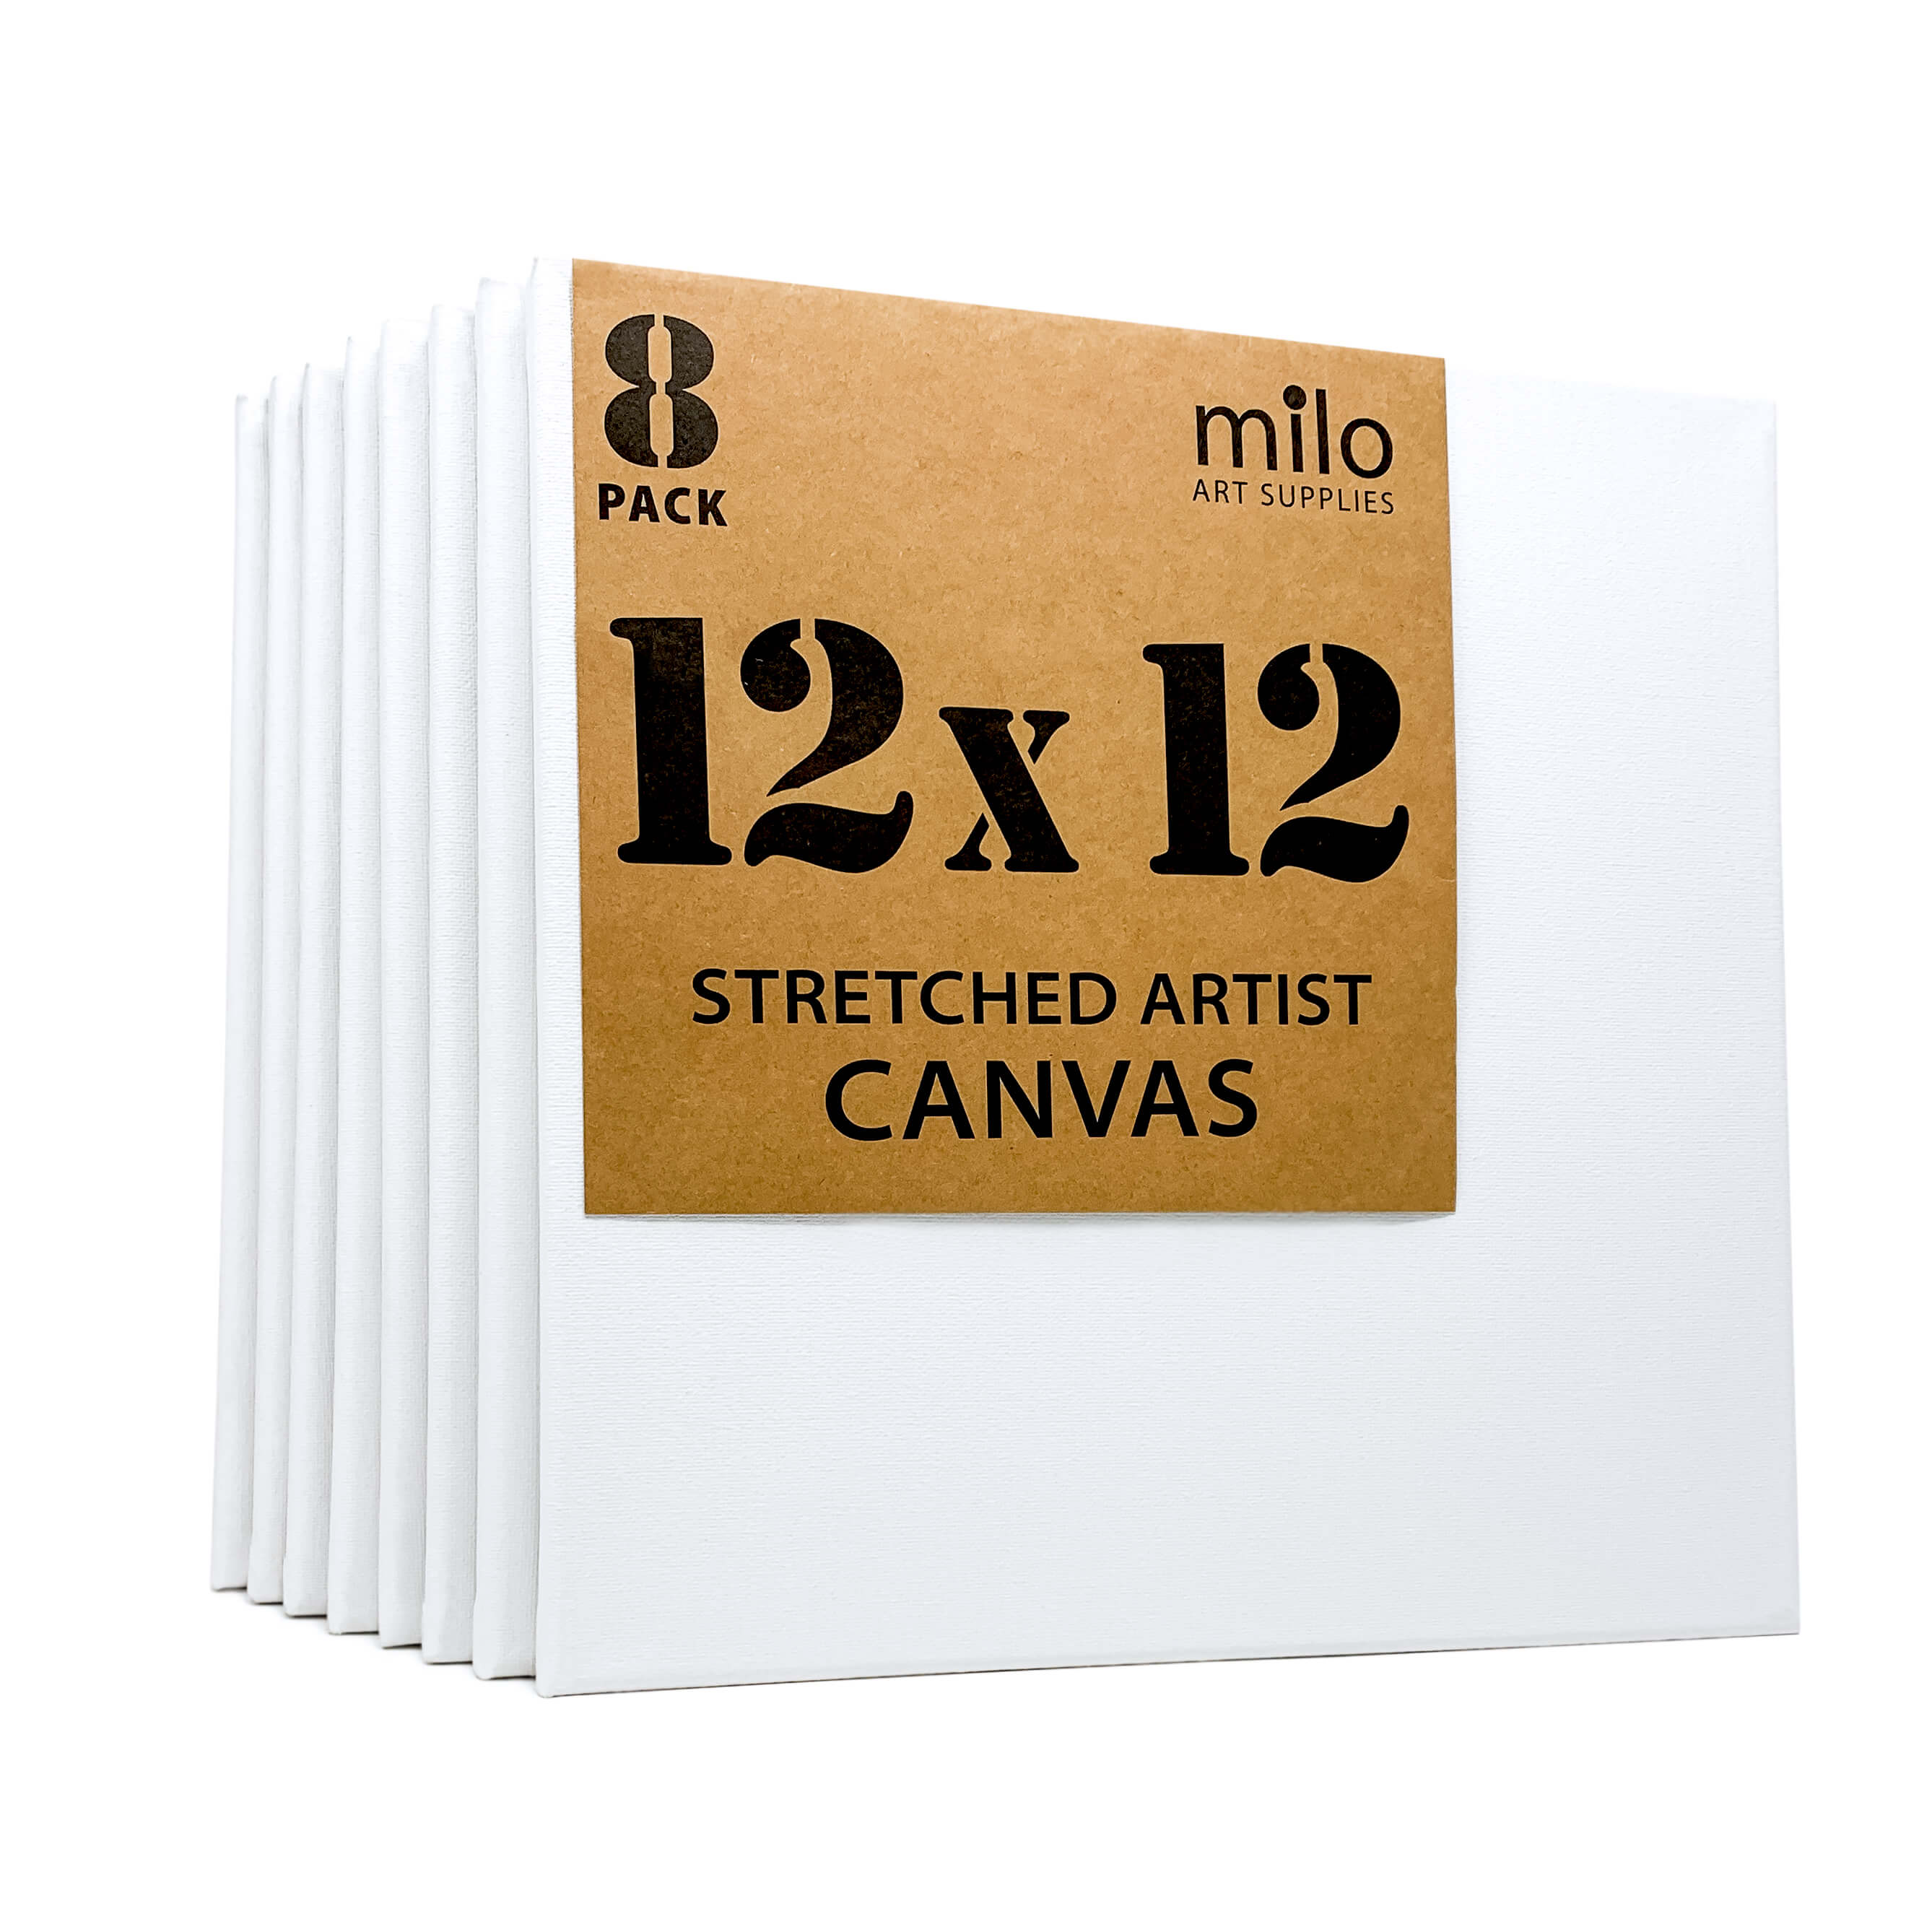 Milo | 8 x 10 Pre Stretched Artist Canvas Value Pack of 10 Canvases